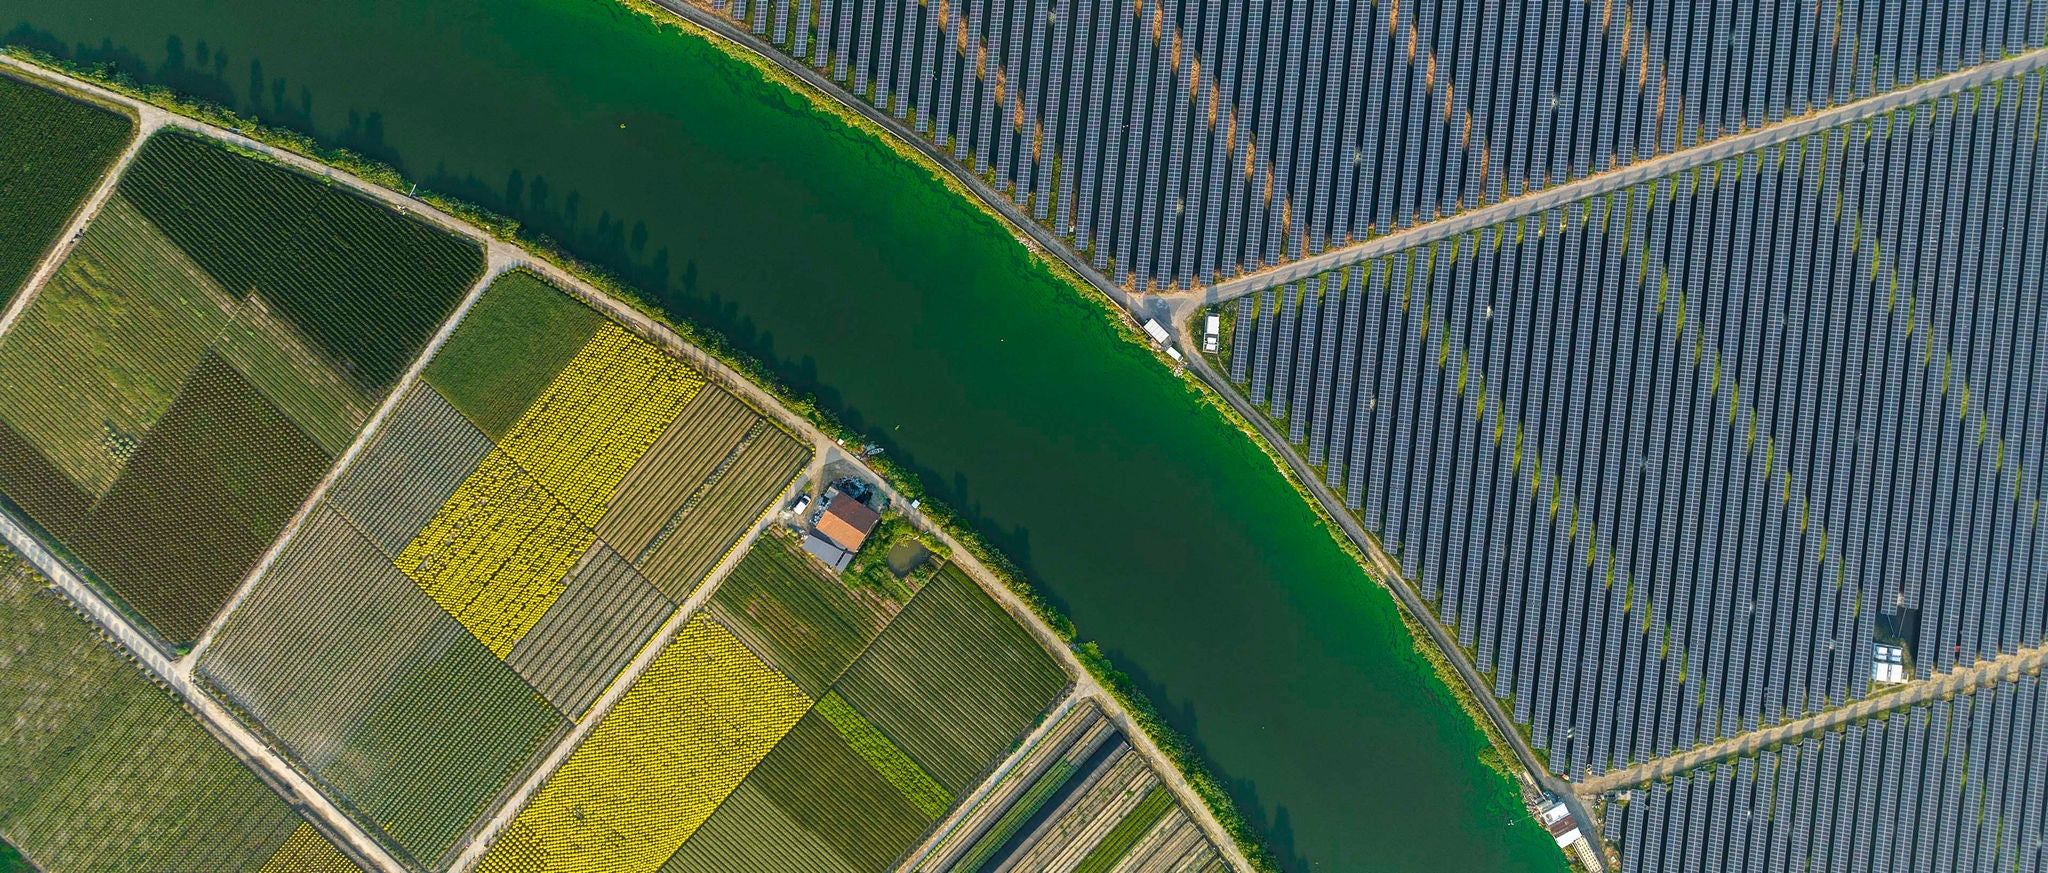 High angle view of solar panels next to an agricultural landscape